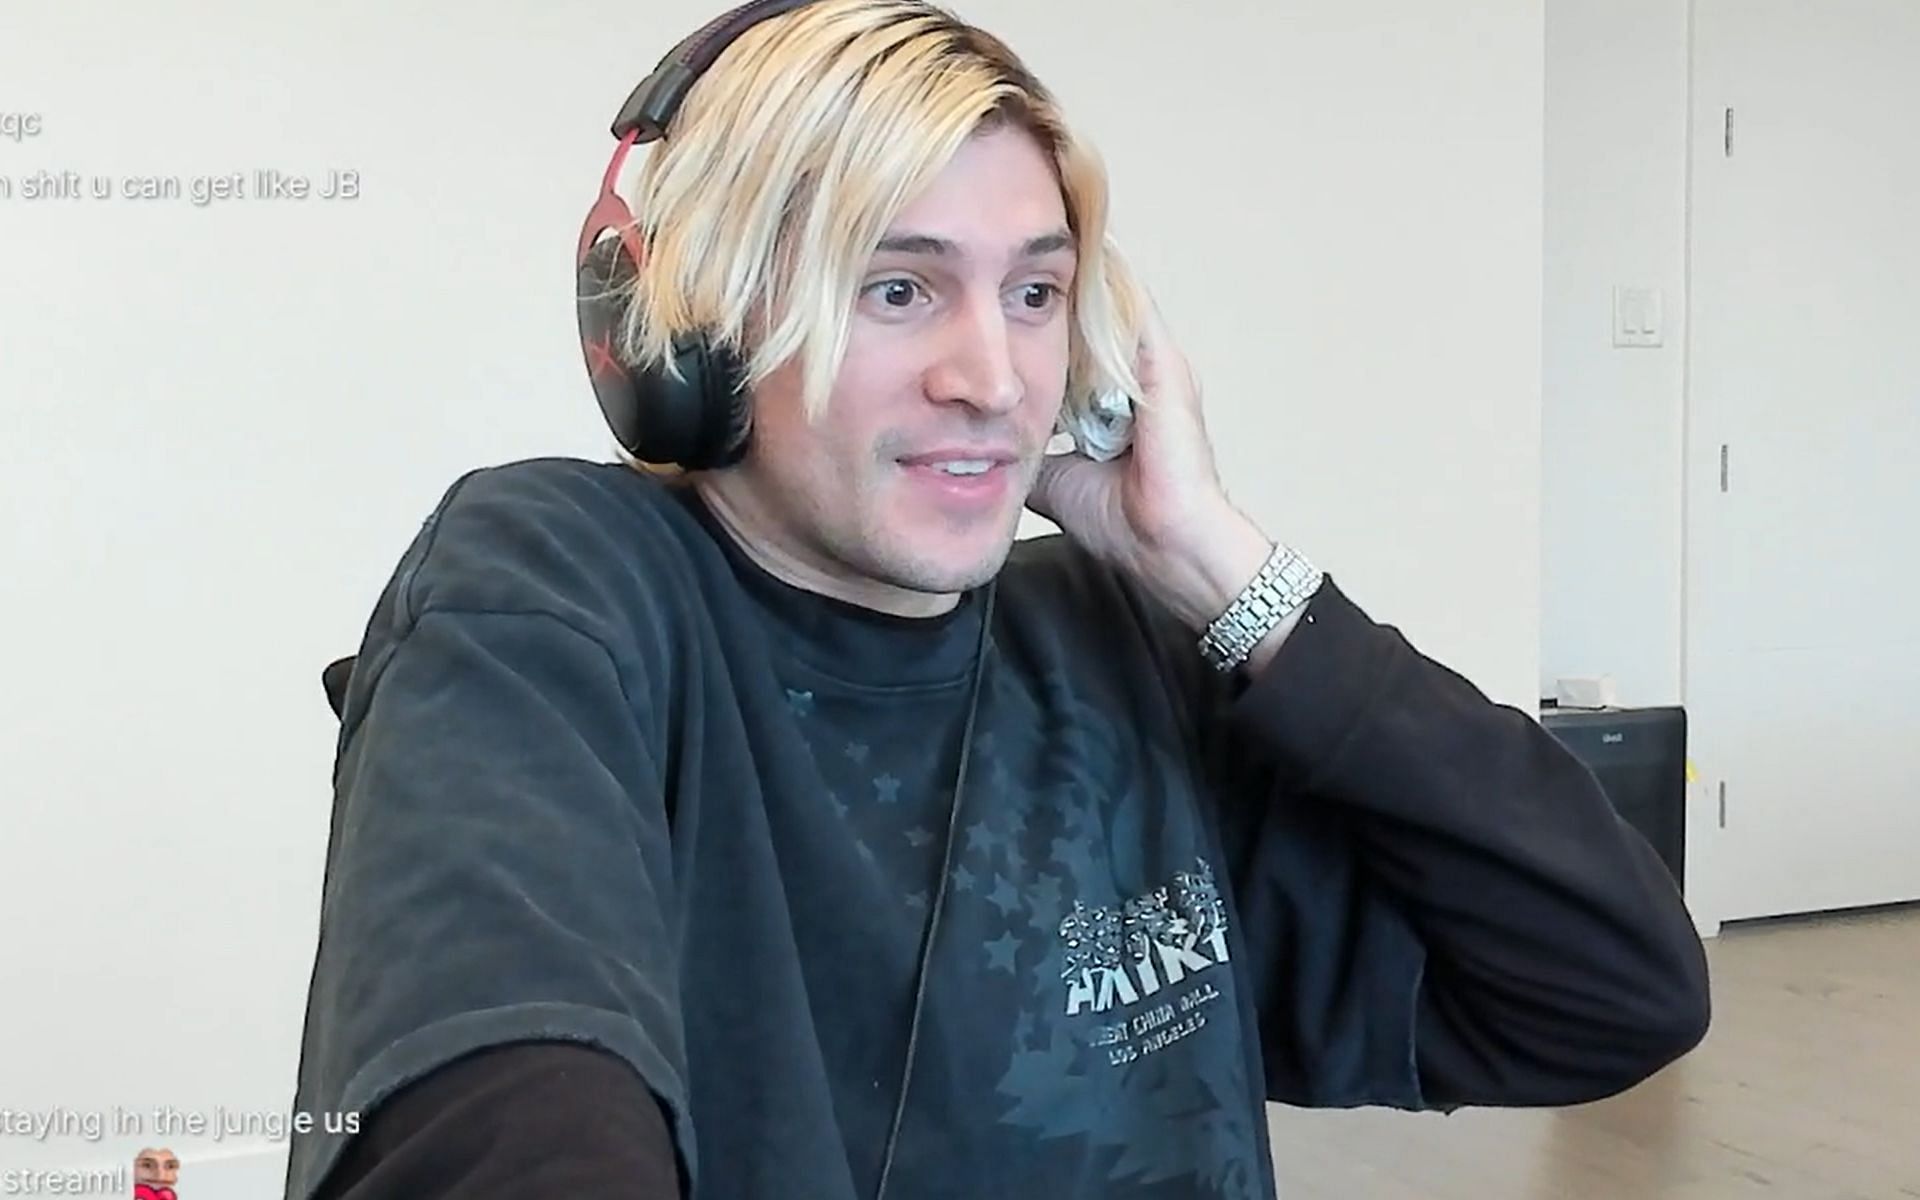 xQc shocked after discovering he has spent over $150,000 on Steam